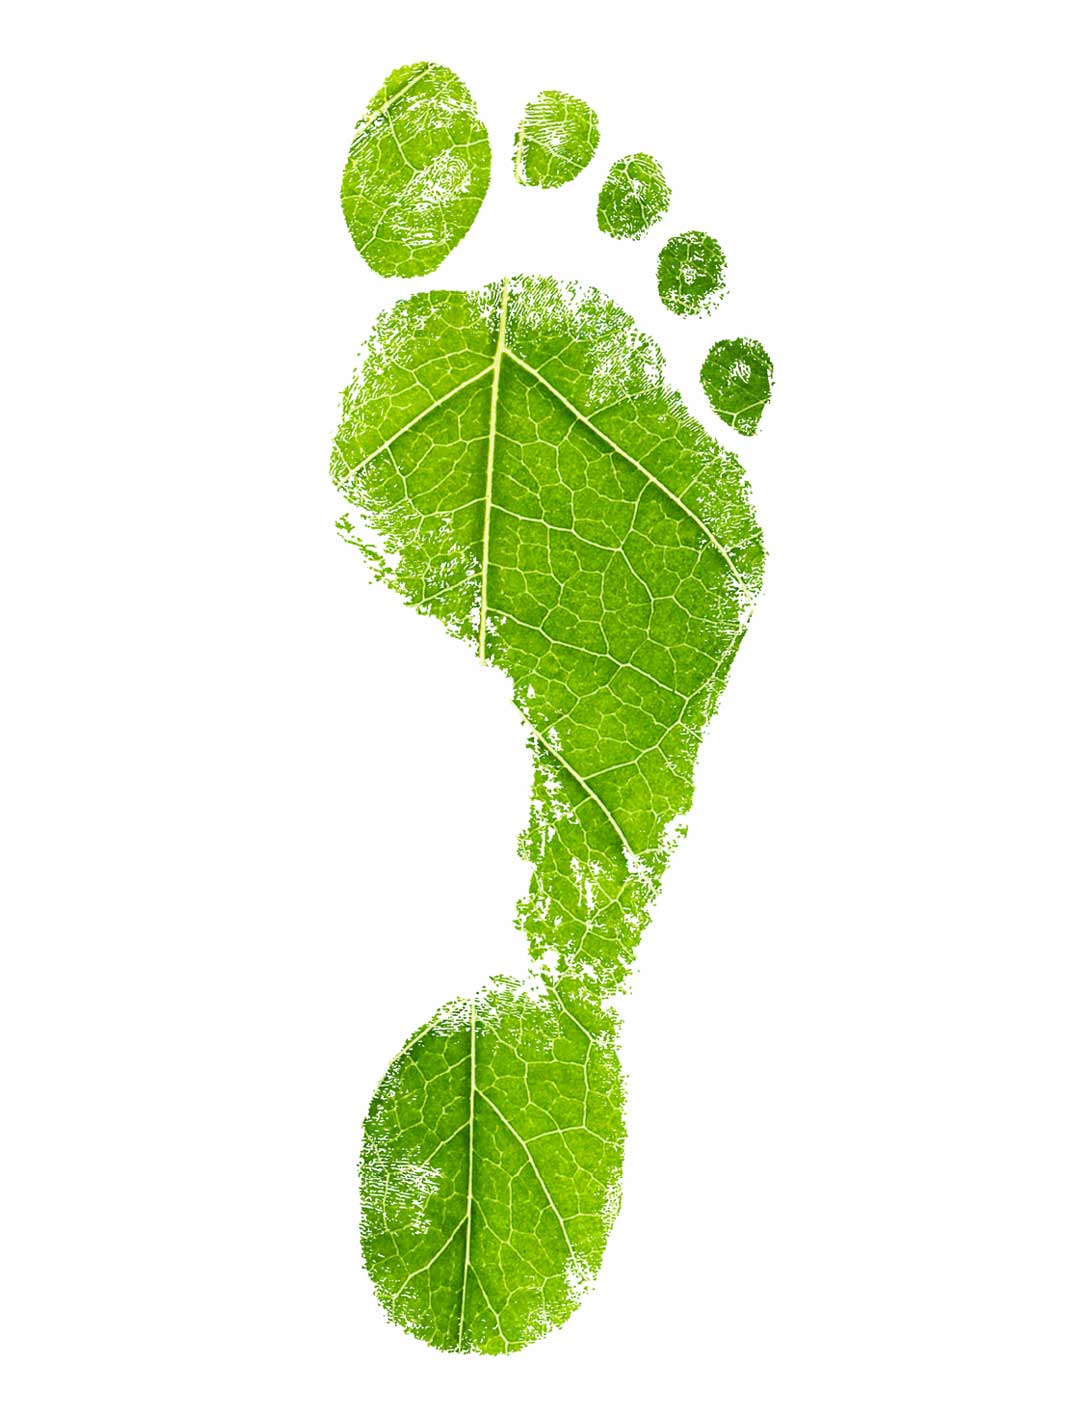 An image of a footprint made from a green leaf.